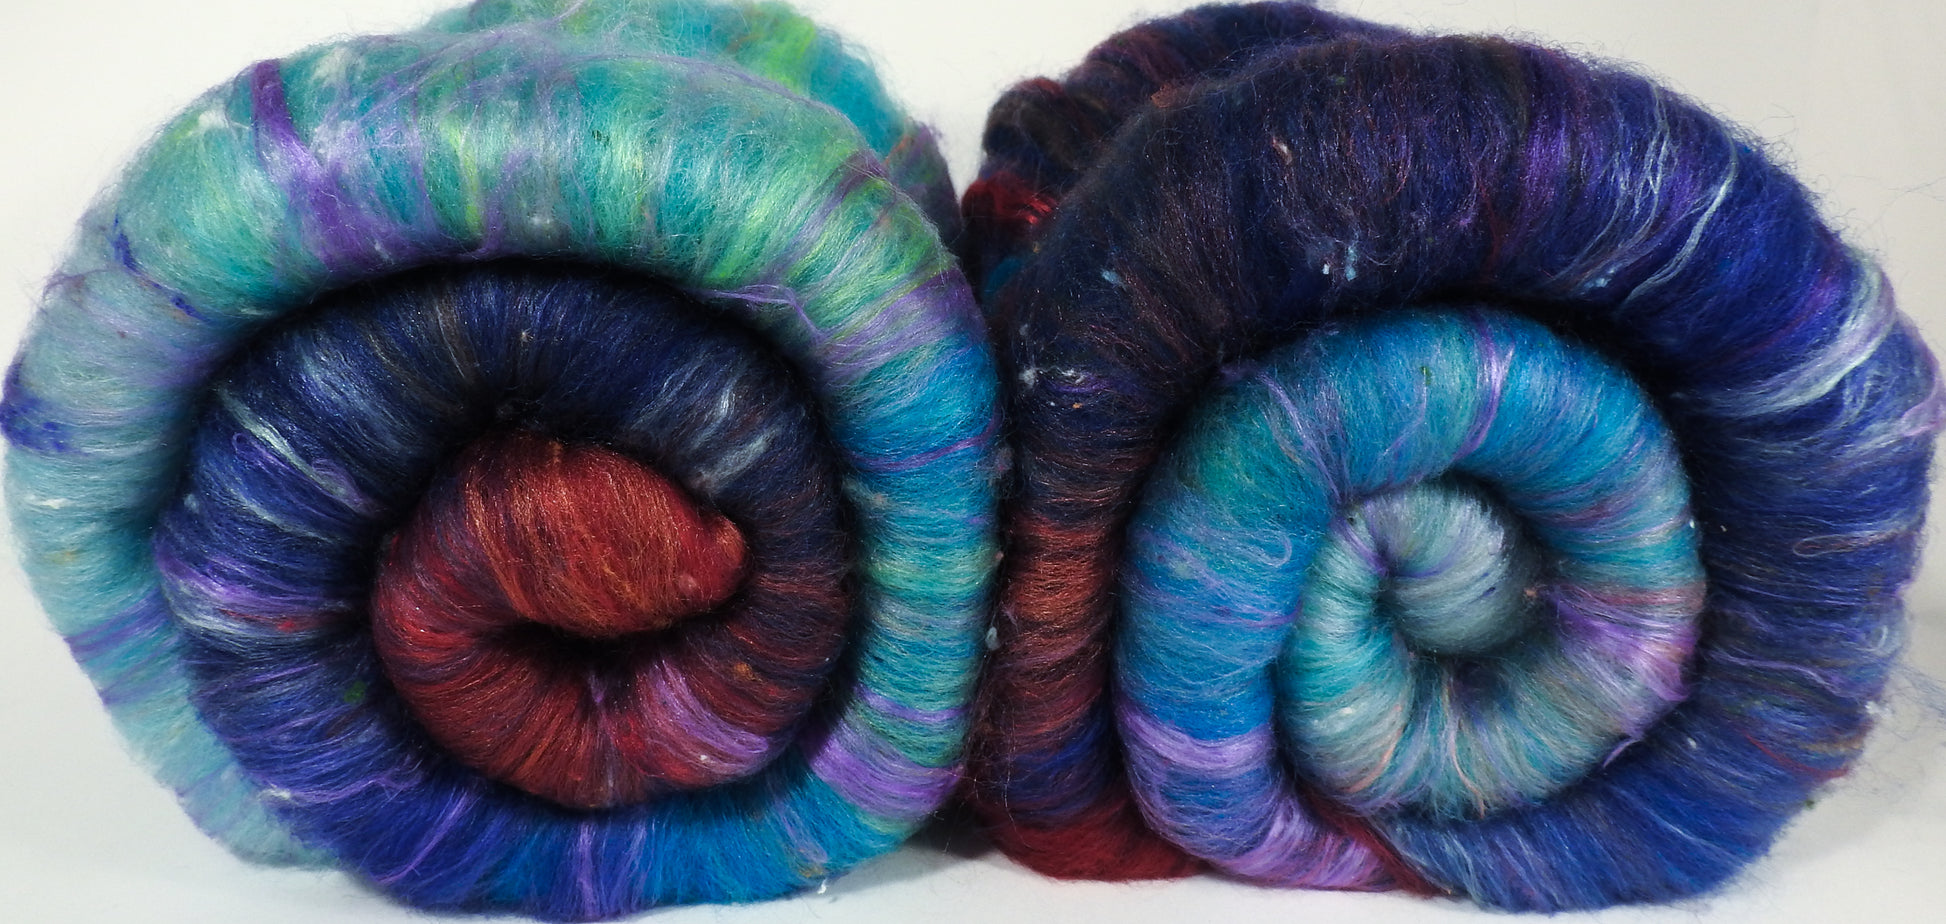 Advice from a Caterpillar - Roly Poly batts- 35% Cotswold fleece, merino, silk, bamboo, silk noil (angelina in the sparkle batts) - Inglenook Fibers